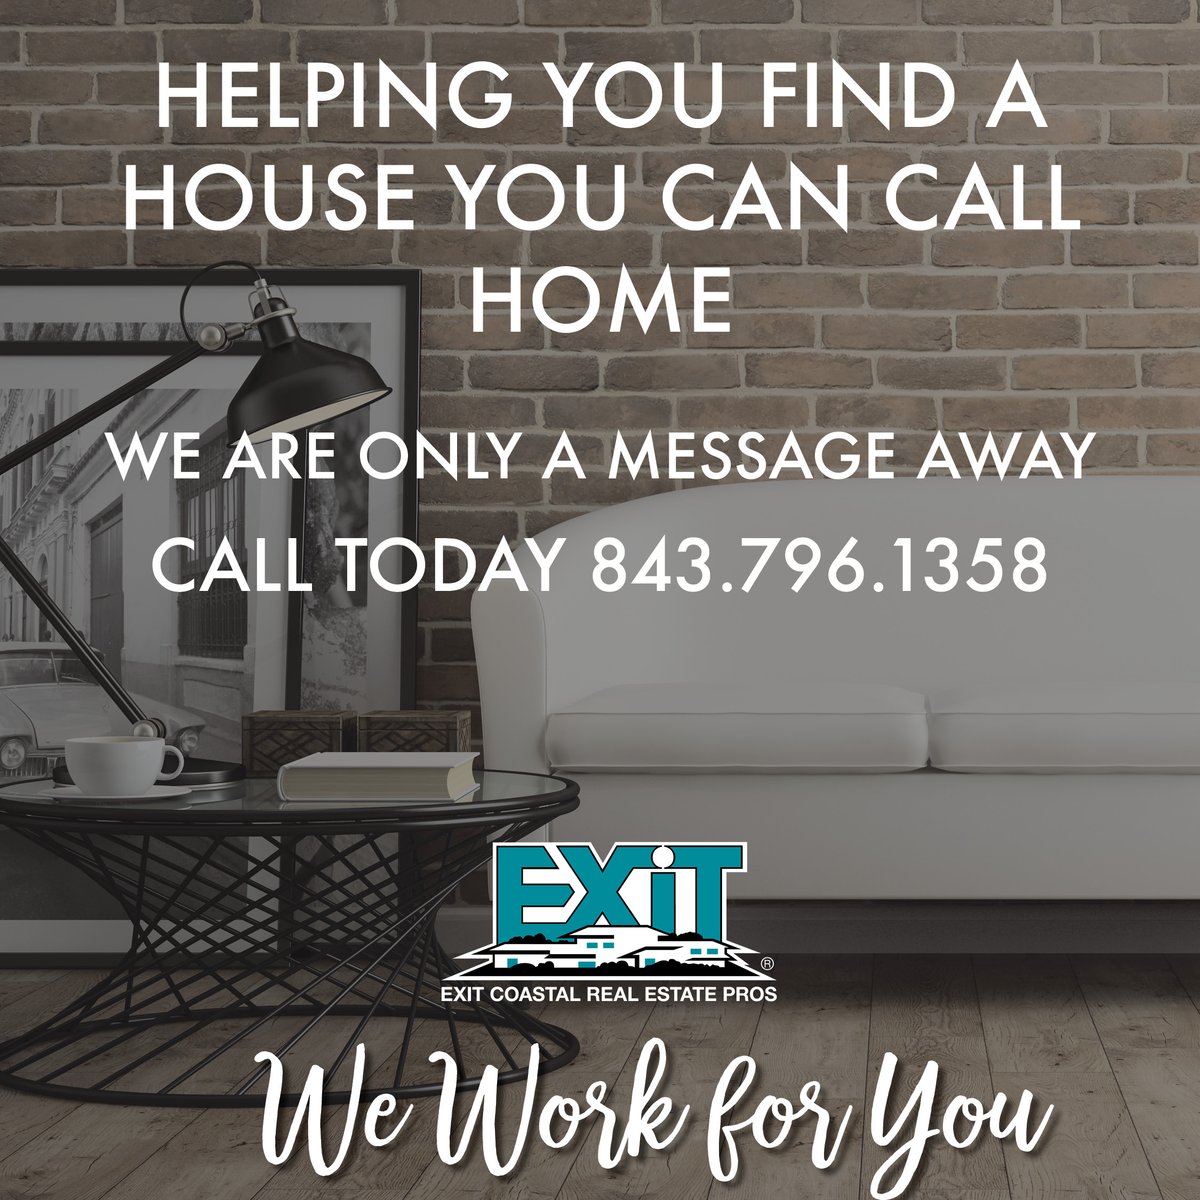 We can help you find a house to call home. Call us today!

#EXITCoastalRealEstatePros #EXITRealEstate #SCHomes #RealEstate #SoldWithStyle #HomeBuyingMadeEasy #EXITRealty #EXITCRP #MyrtleBeachRealEstate #EXITRealtyIsGrowing #EXITisEverywhere #LoveEXIT #CoastalRealEstate...